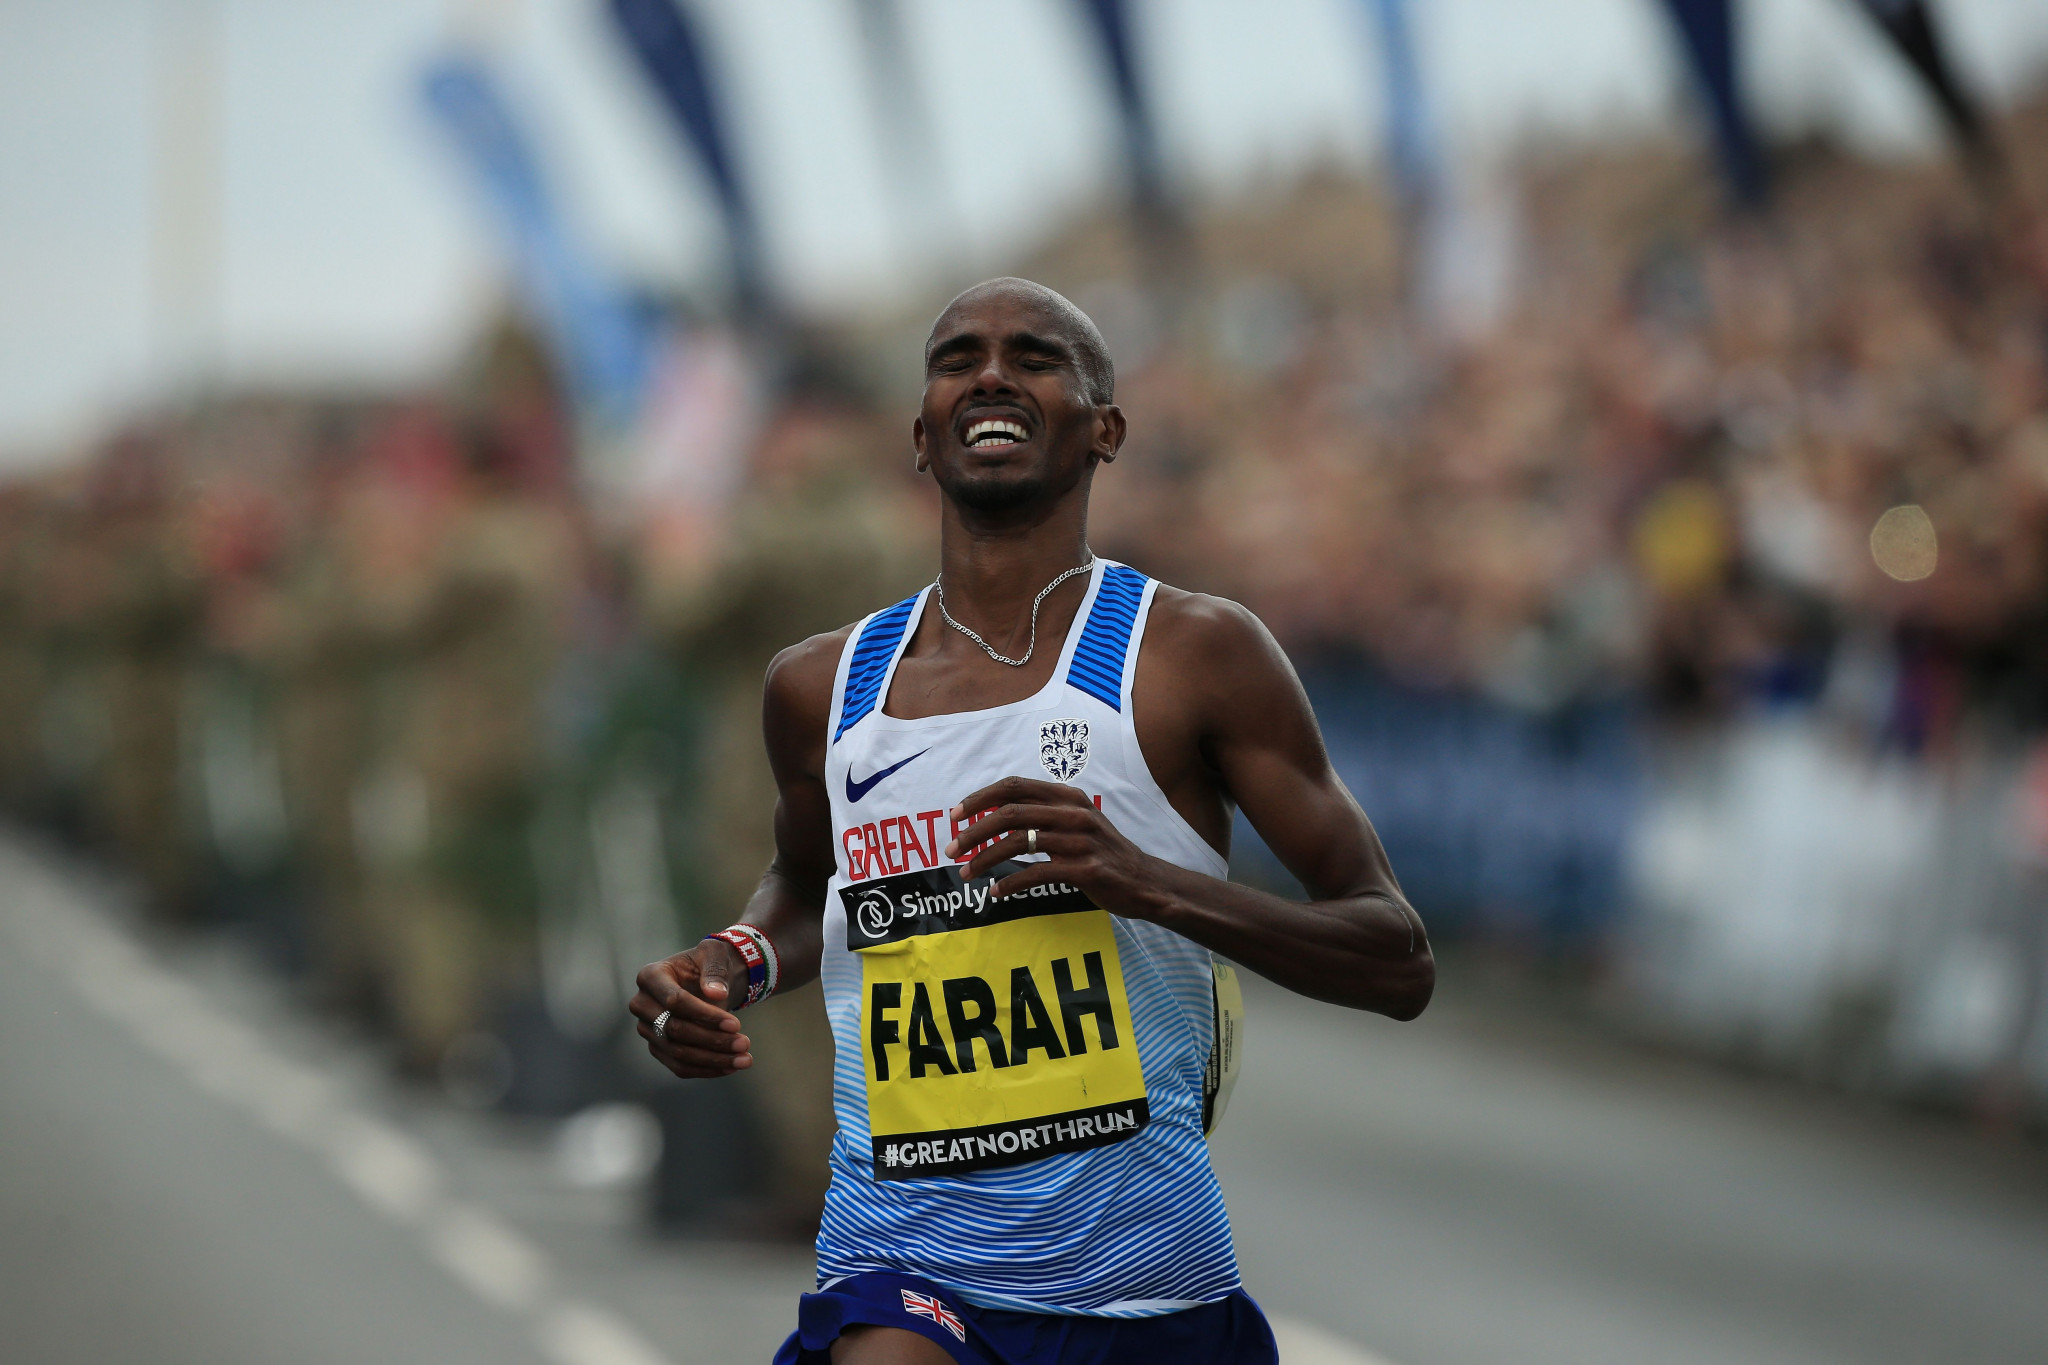 Farah denies split from Salazar connected to doping allegations